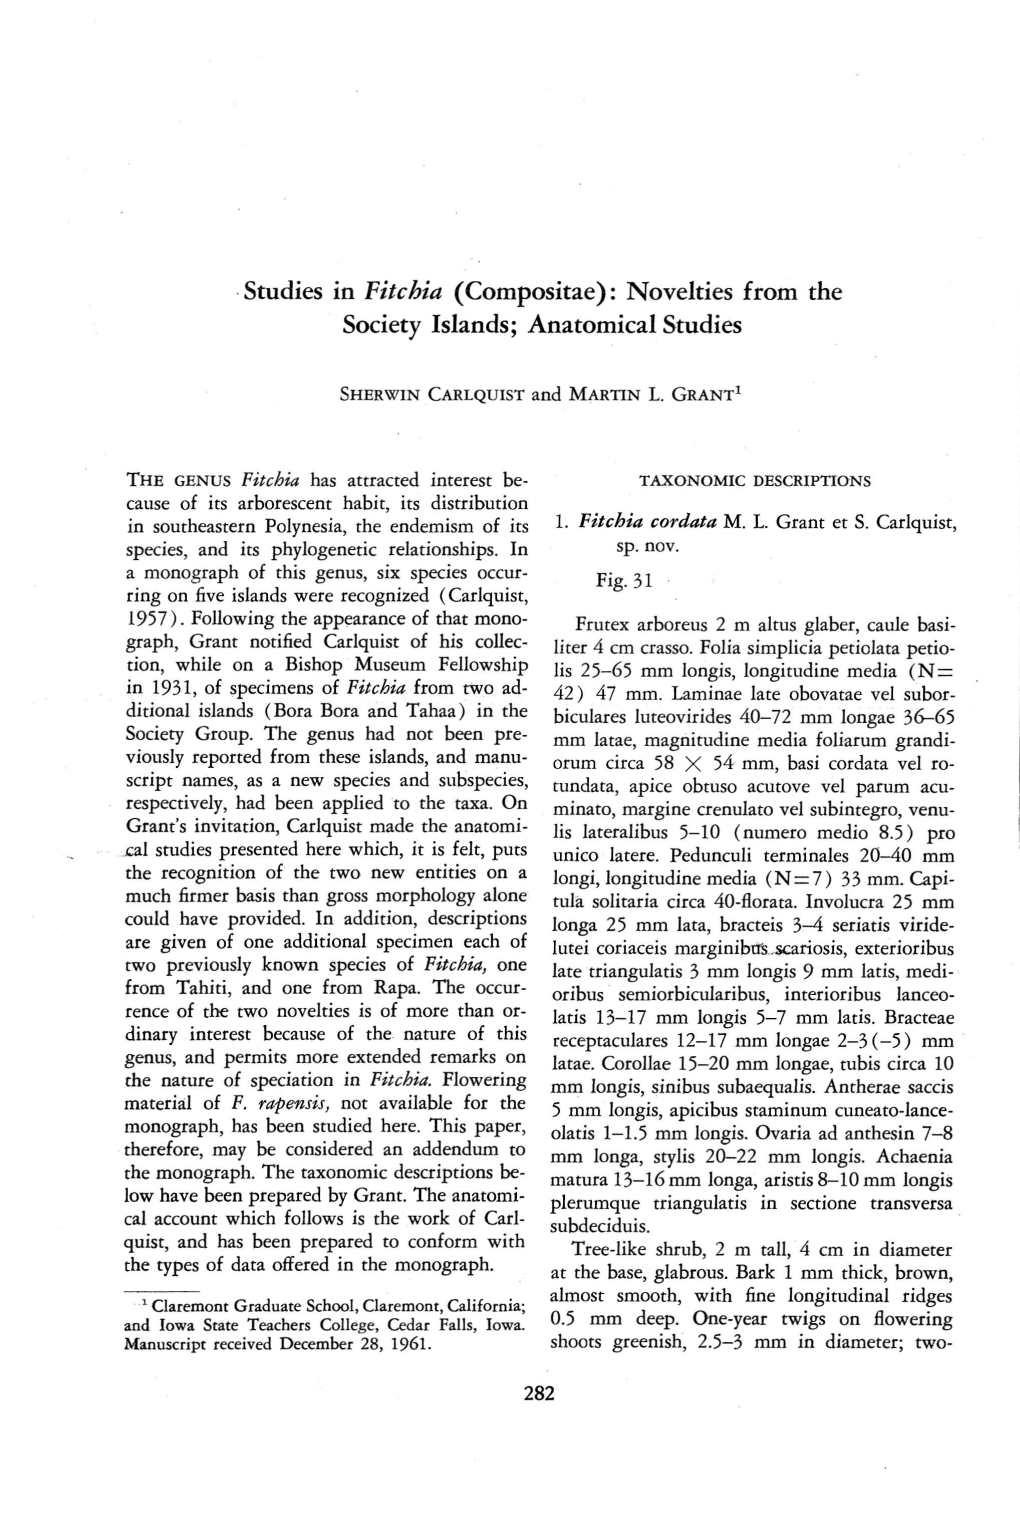 Studies in Fitchia (Compositae): Novelties from the Society Islands